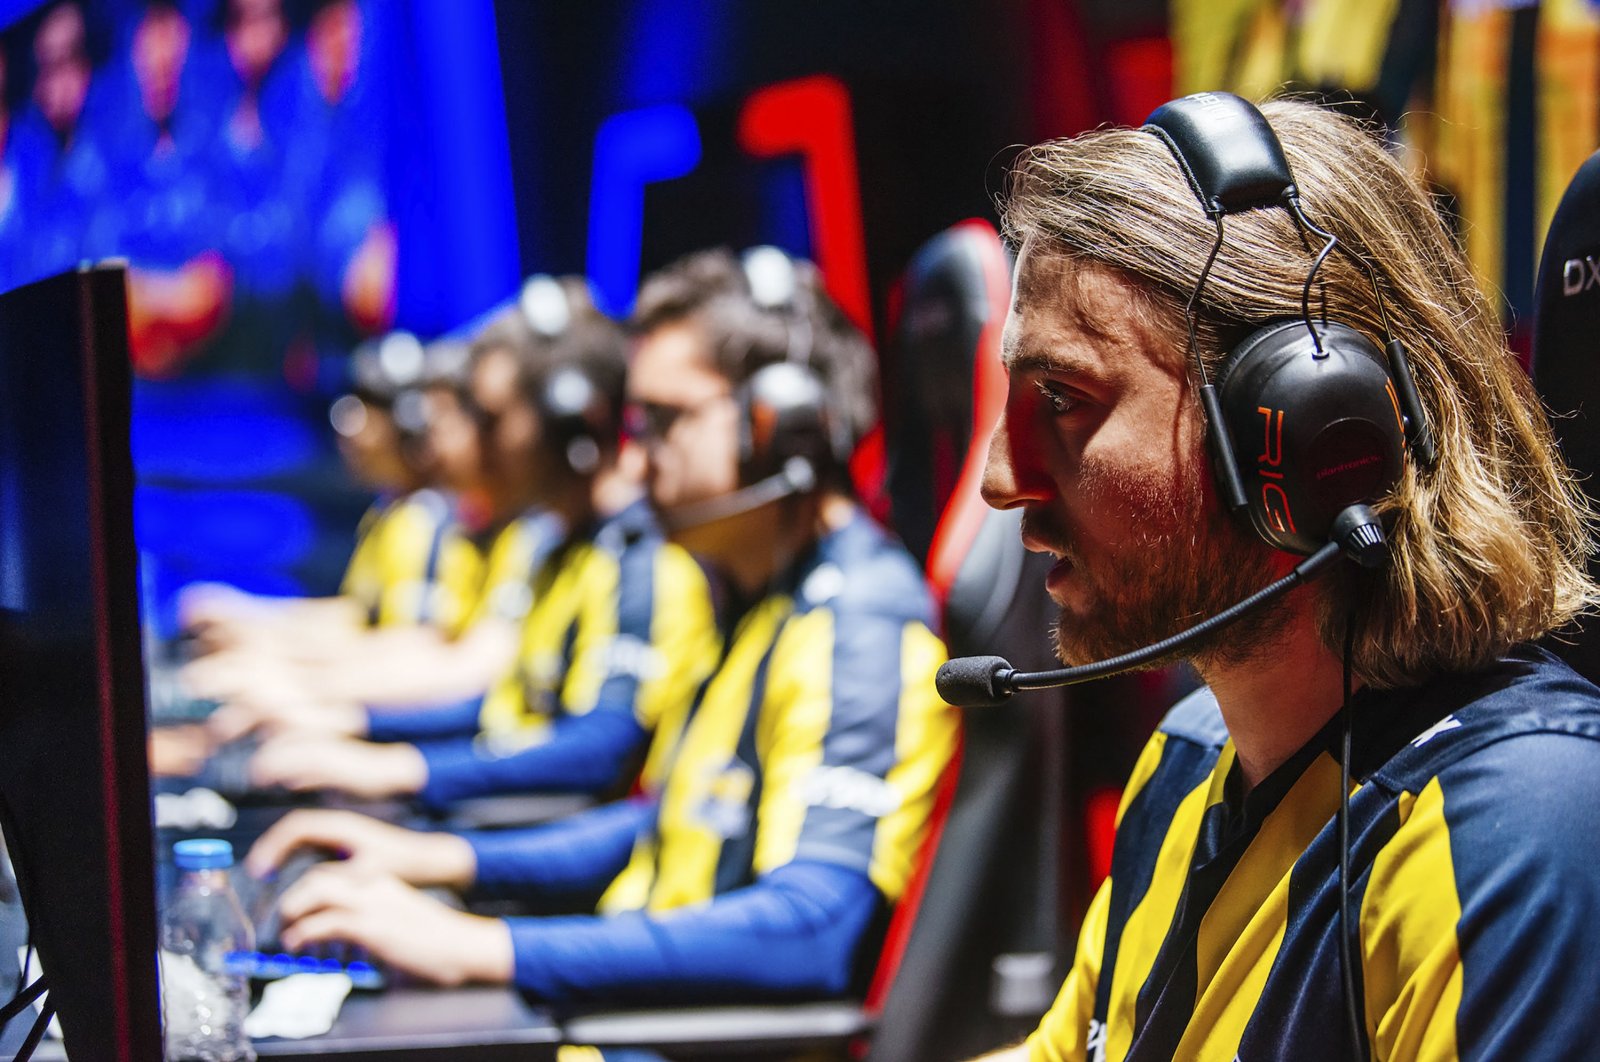 Players of the Fenerbahçe 1907 Esports team compete at an esports tournament in Istanbul, Turkey, April 13, 2019. (Sabah File Photo)